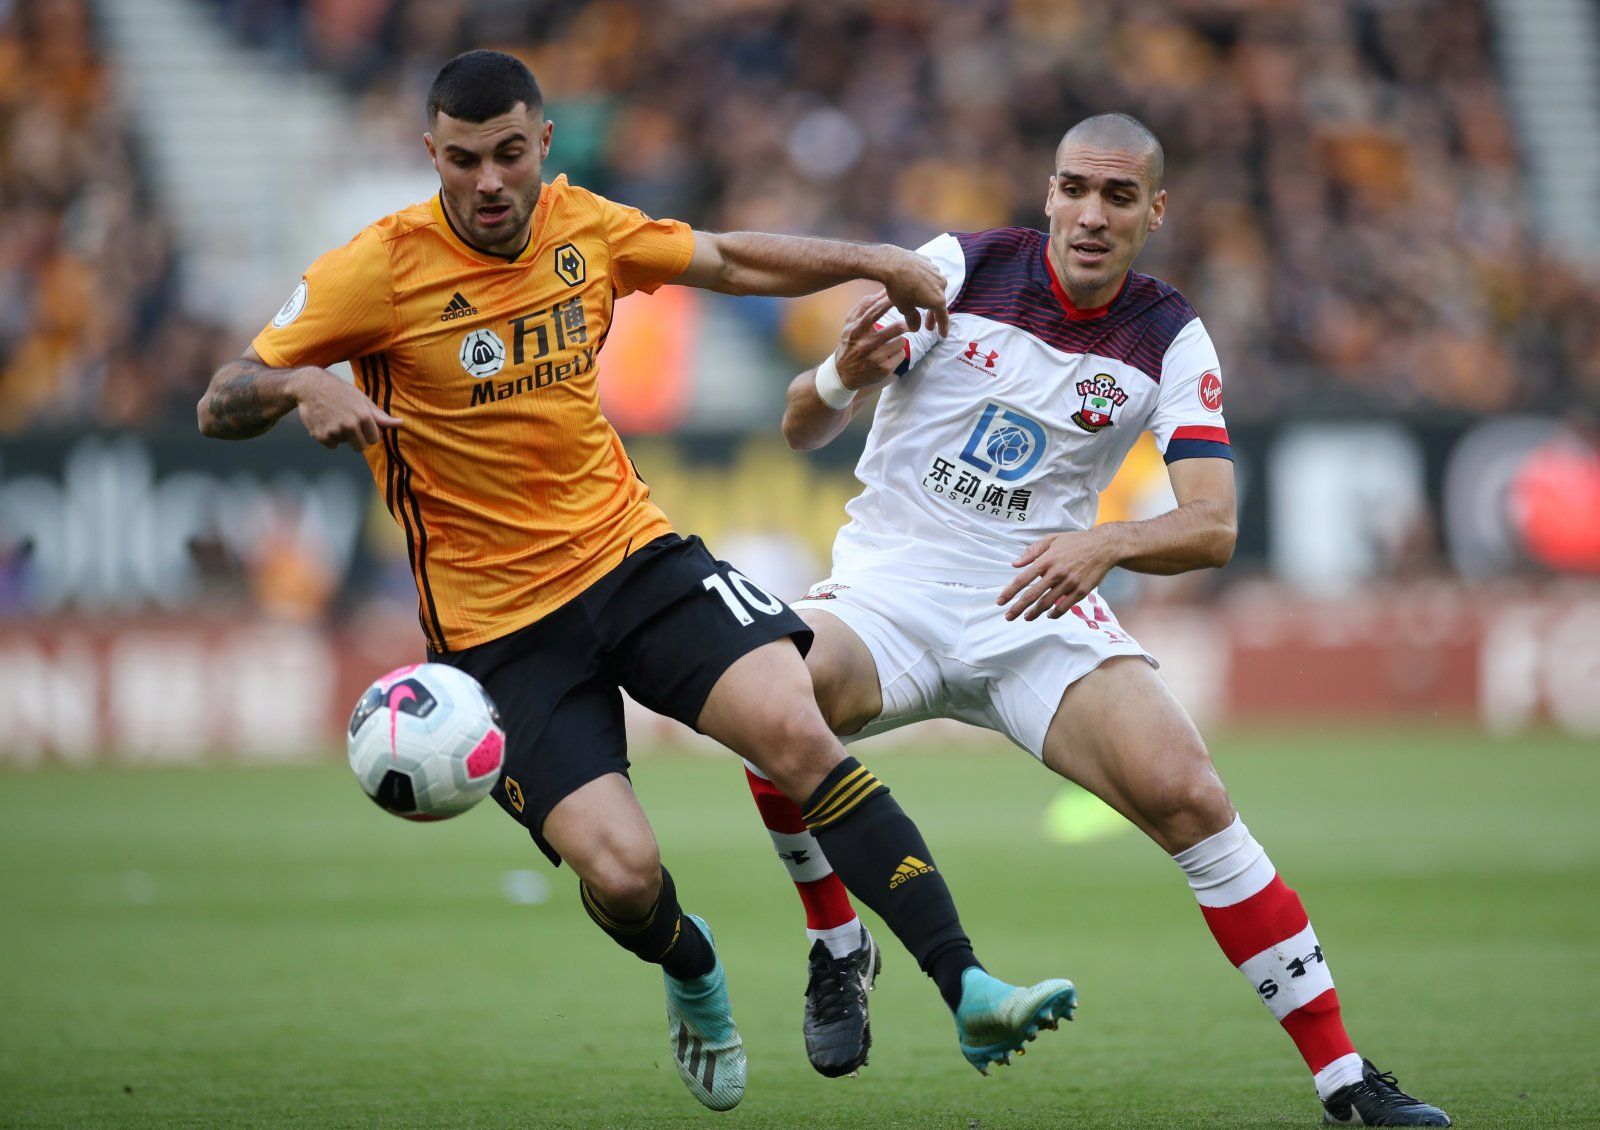 Wolverhampton Wanderers' Patrick Cutrone in action with Southampton's Oriol Romeu